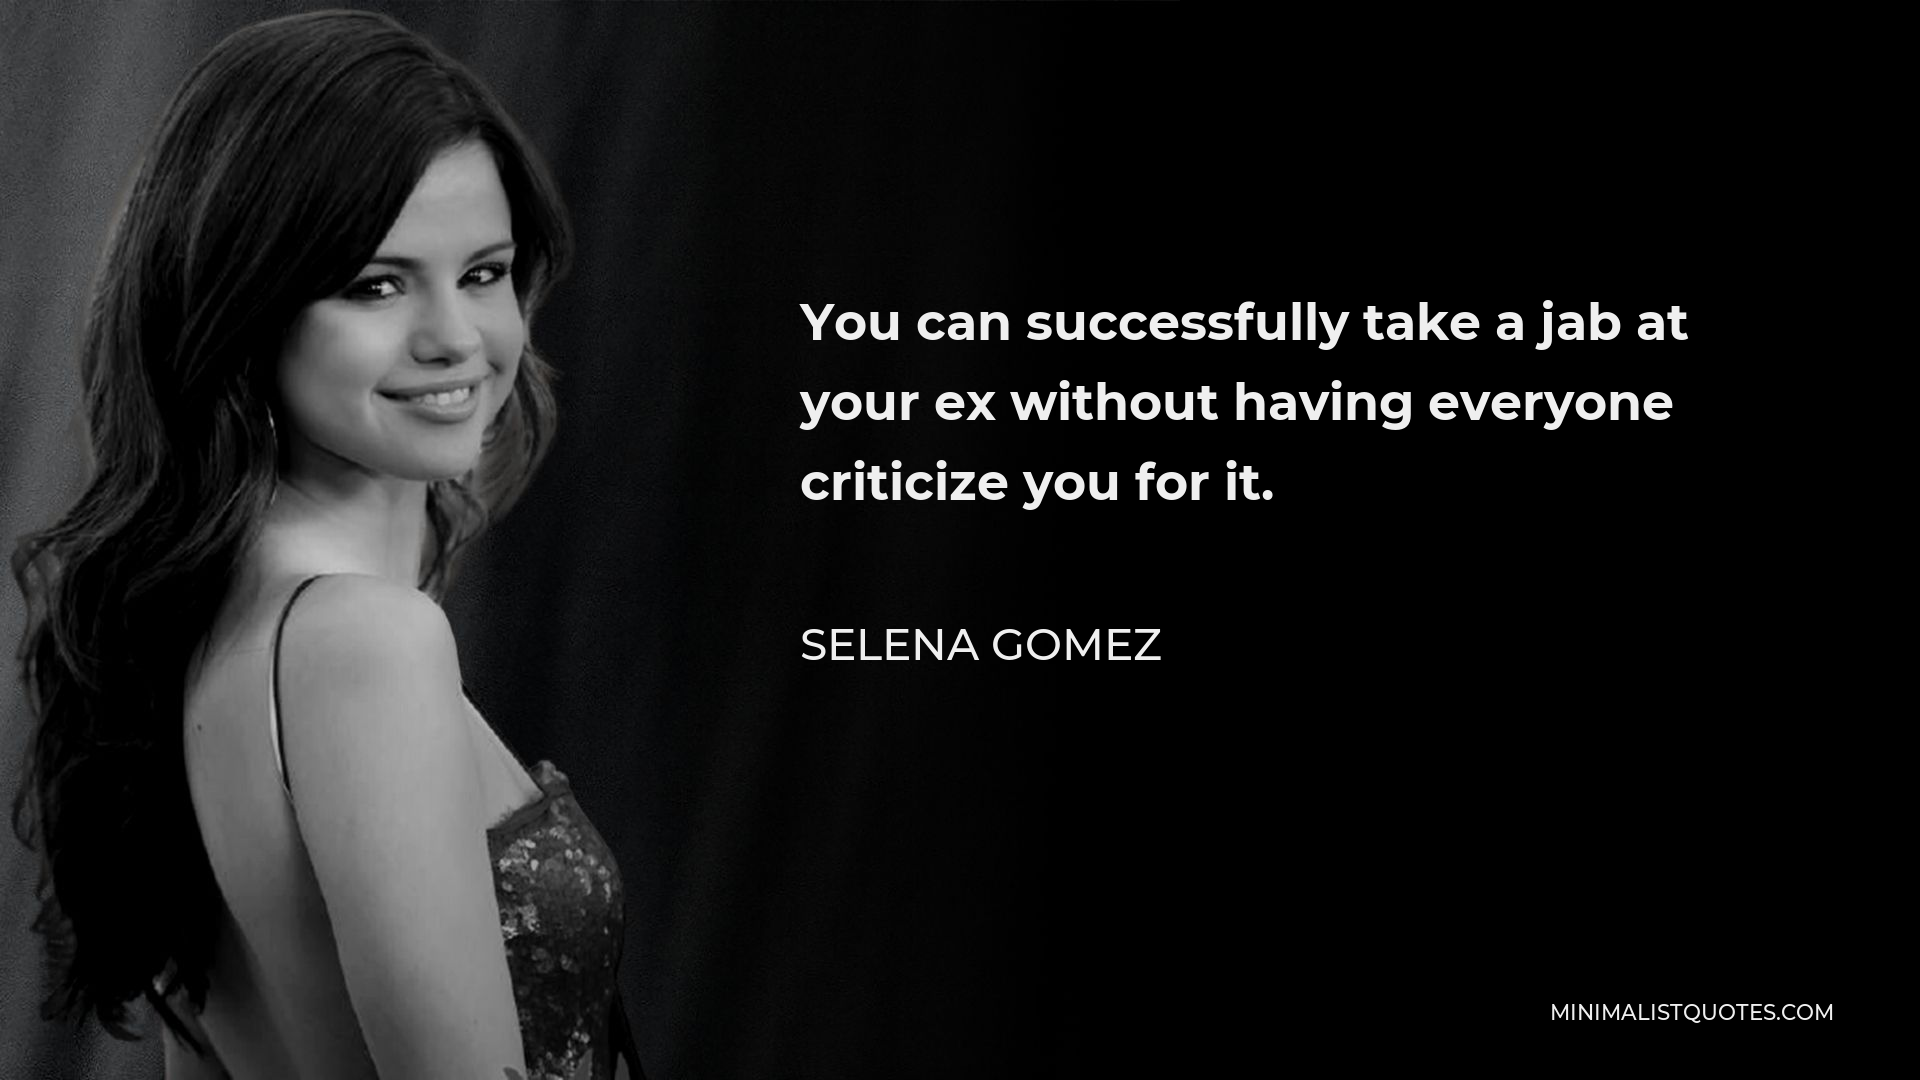 Selena Gomez Quote - You can successfully take a jab at your ex without having everyone criticize you for it.